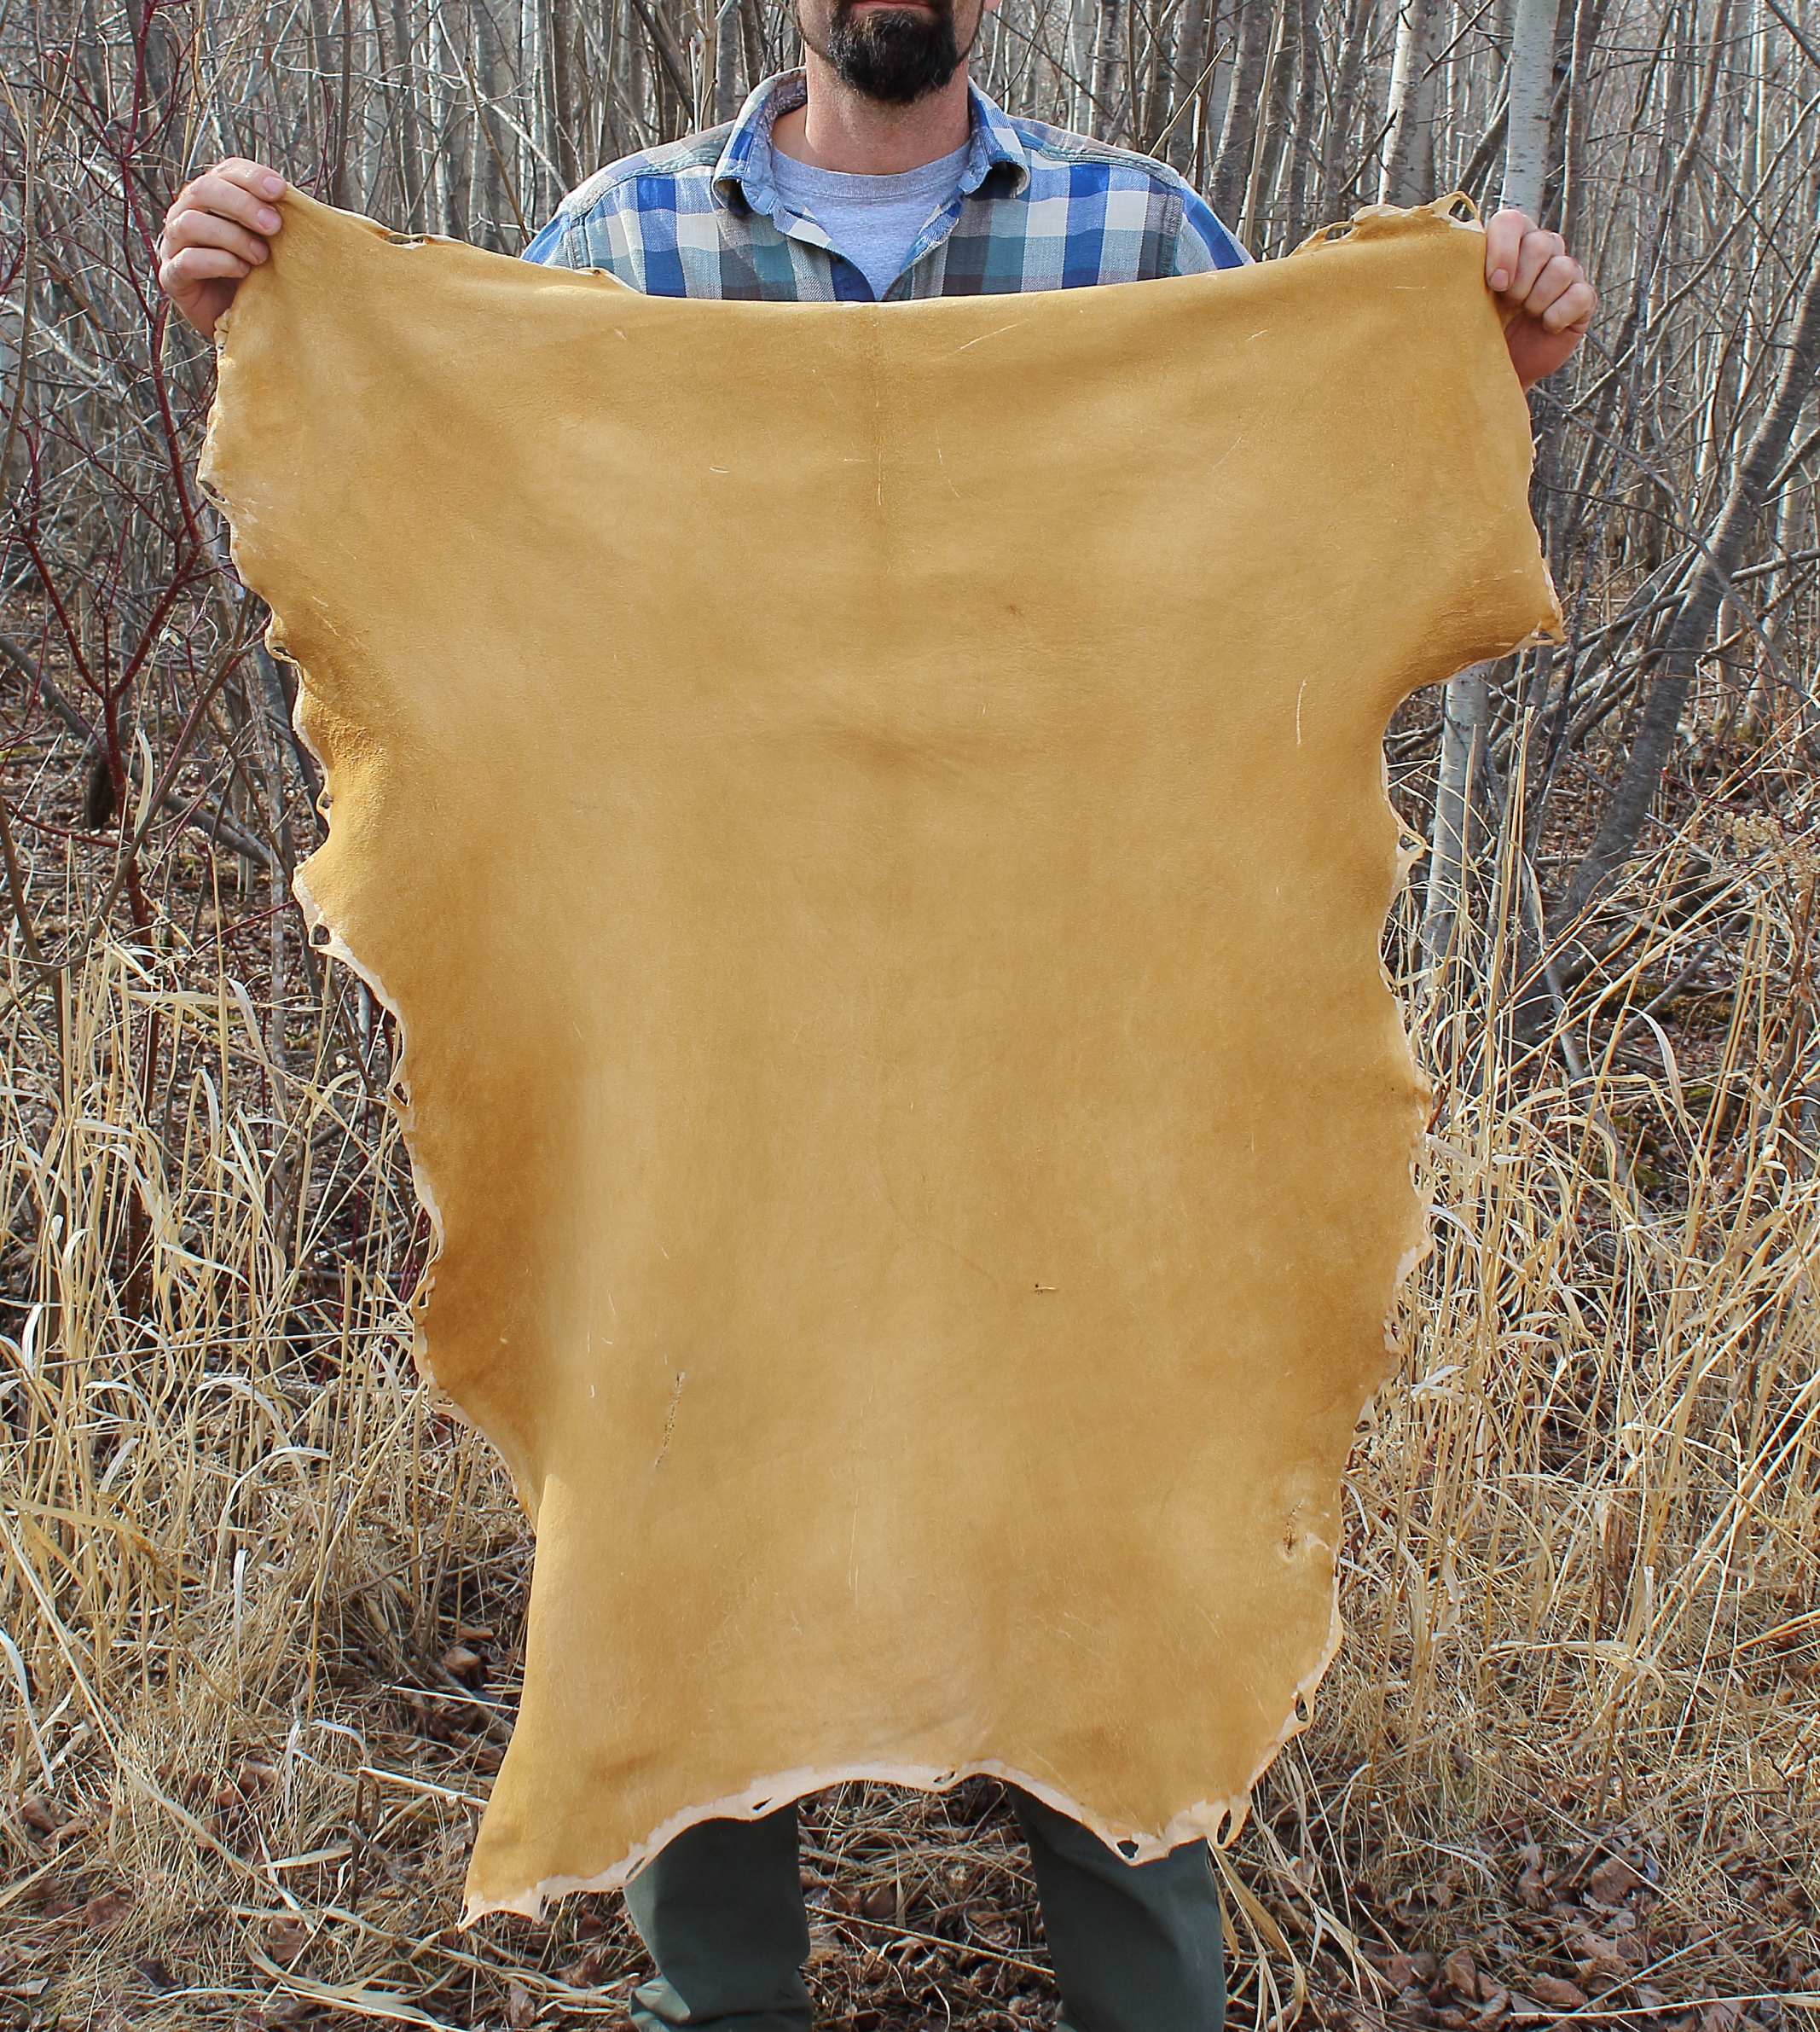 Brain-tanning Deer Hides for Leather – Chumash Science Through Time